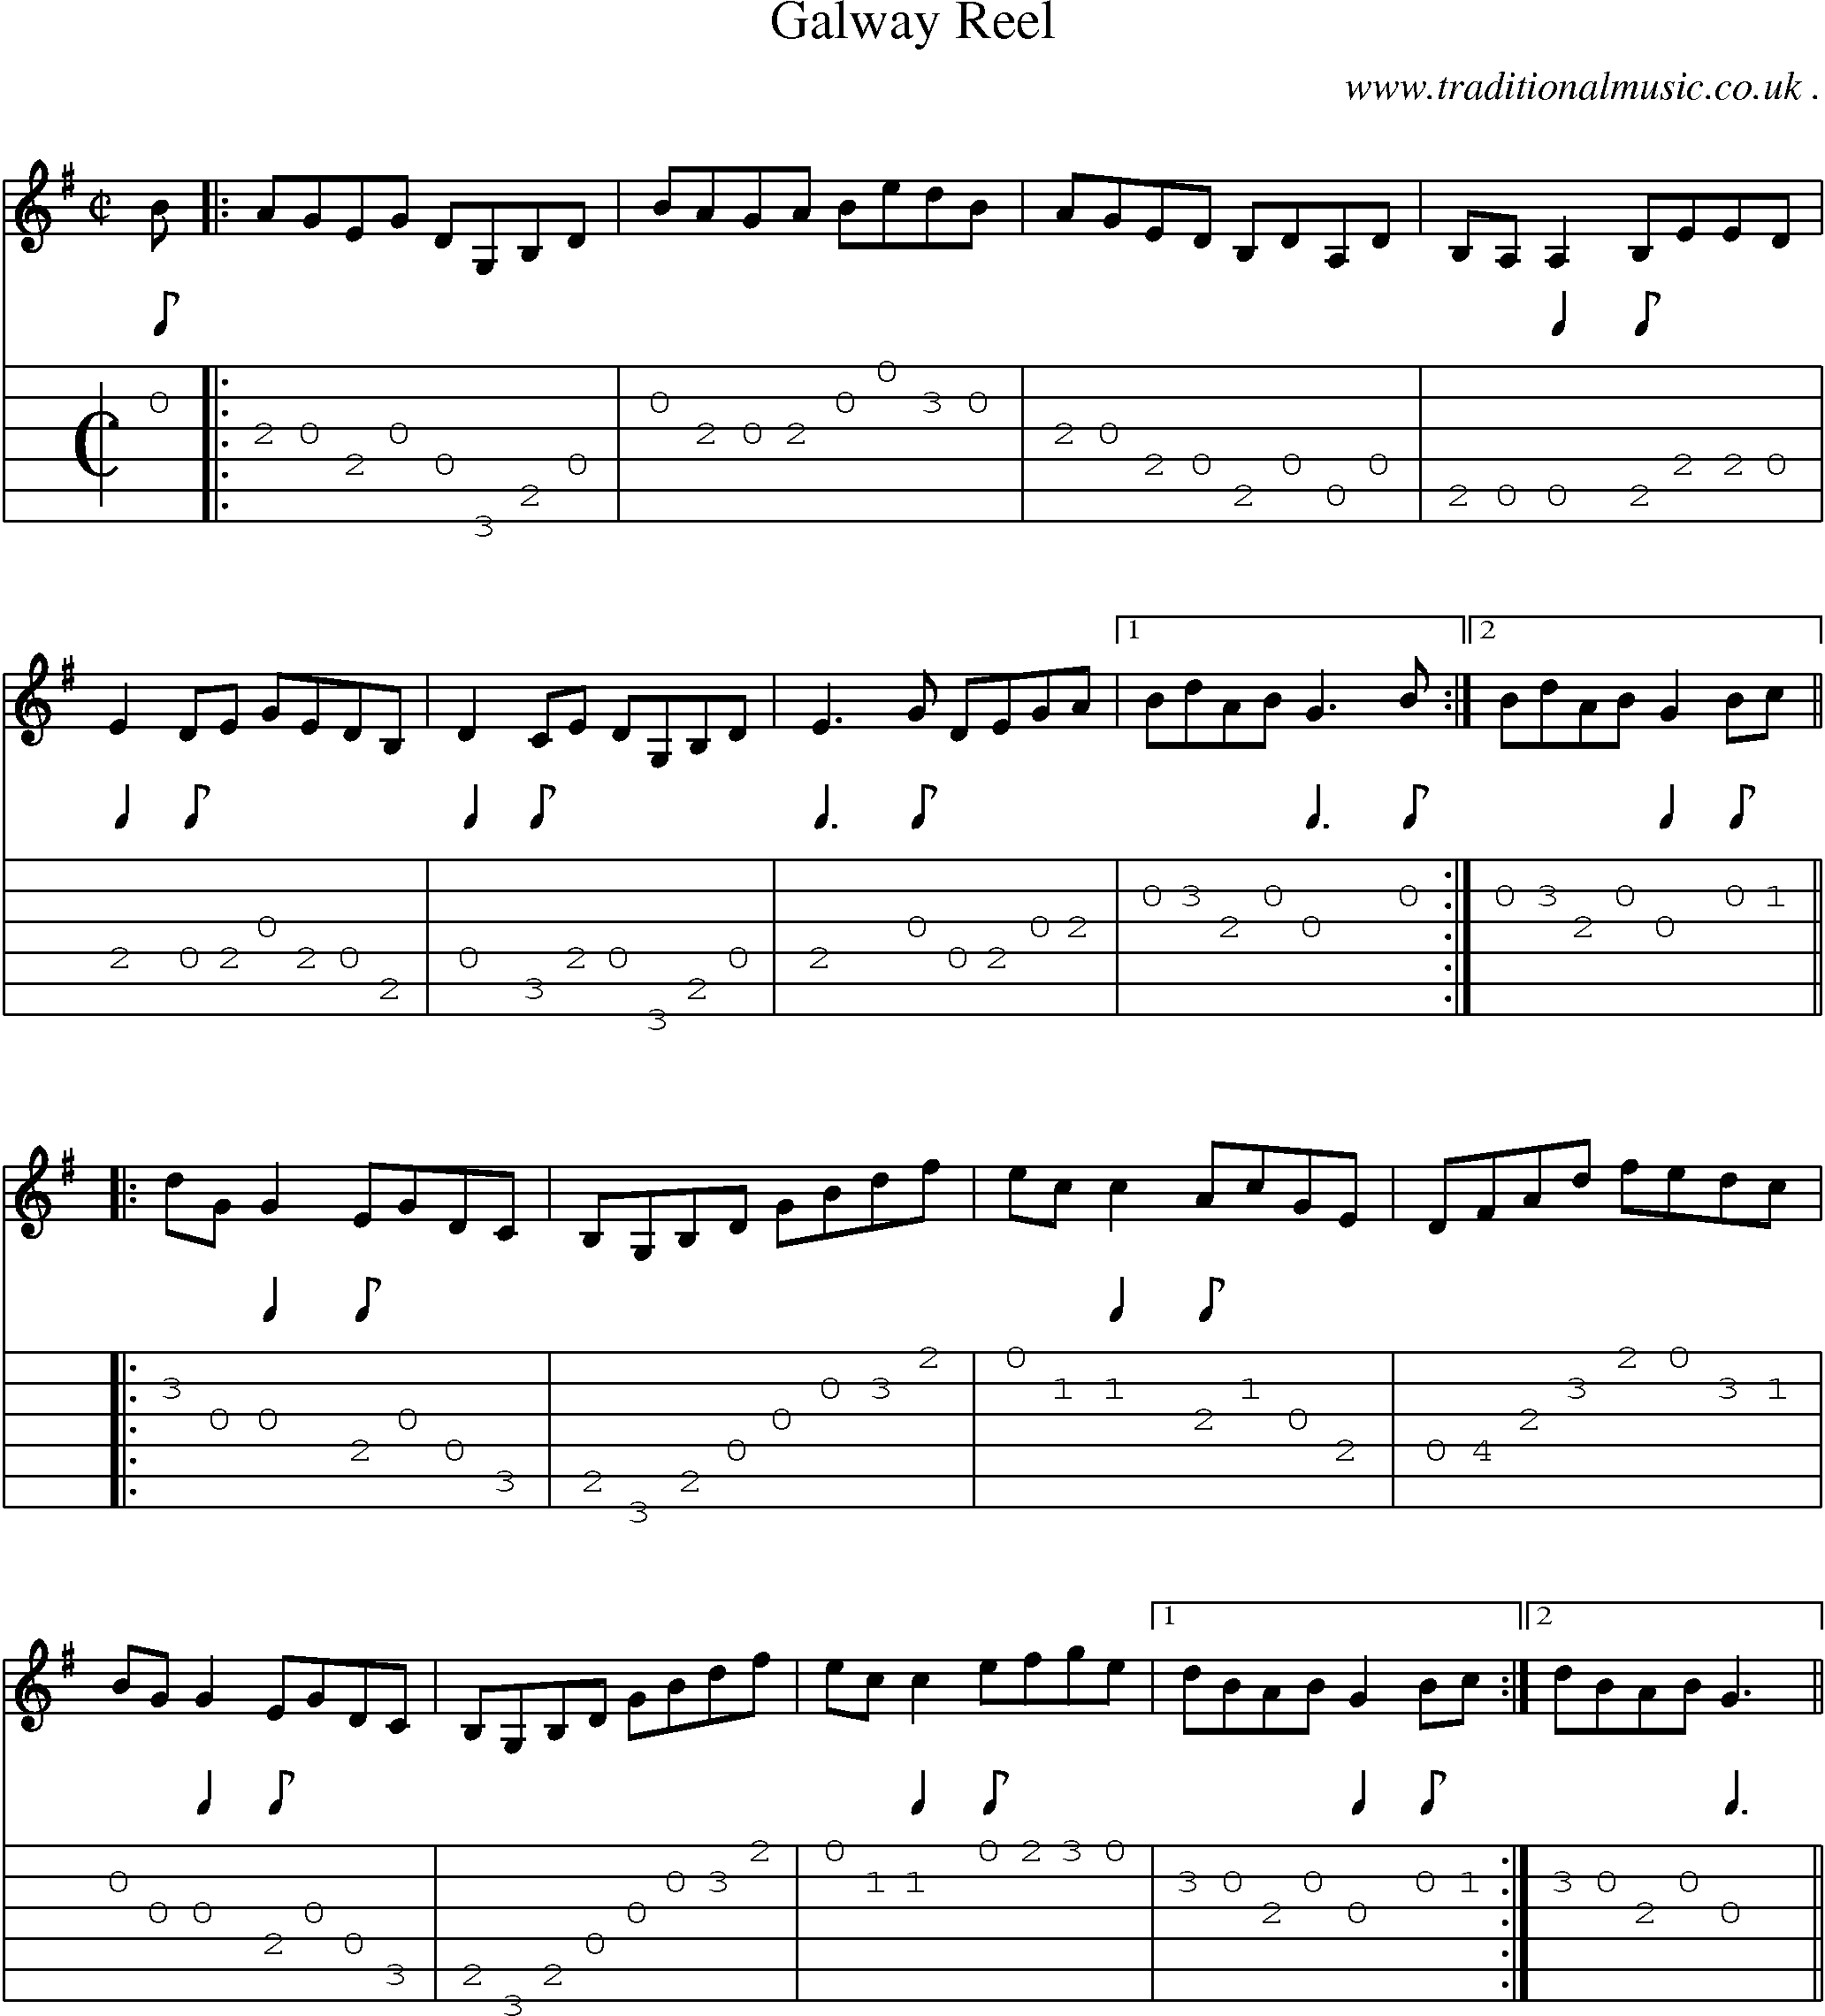 Sheet-Music and Guitar Tabs for Galway Reel